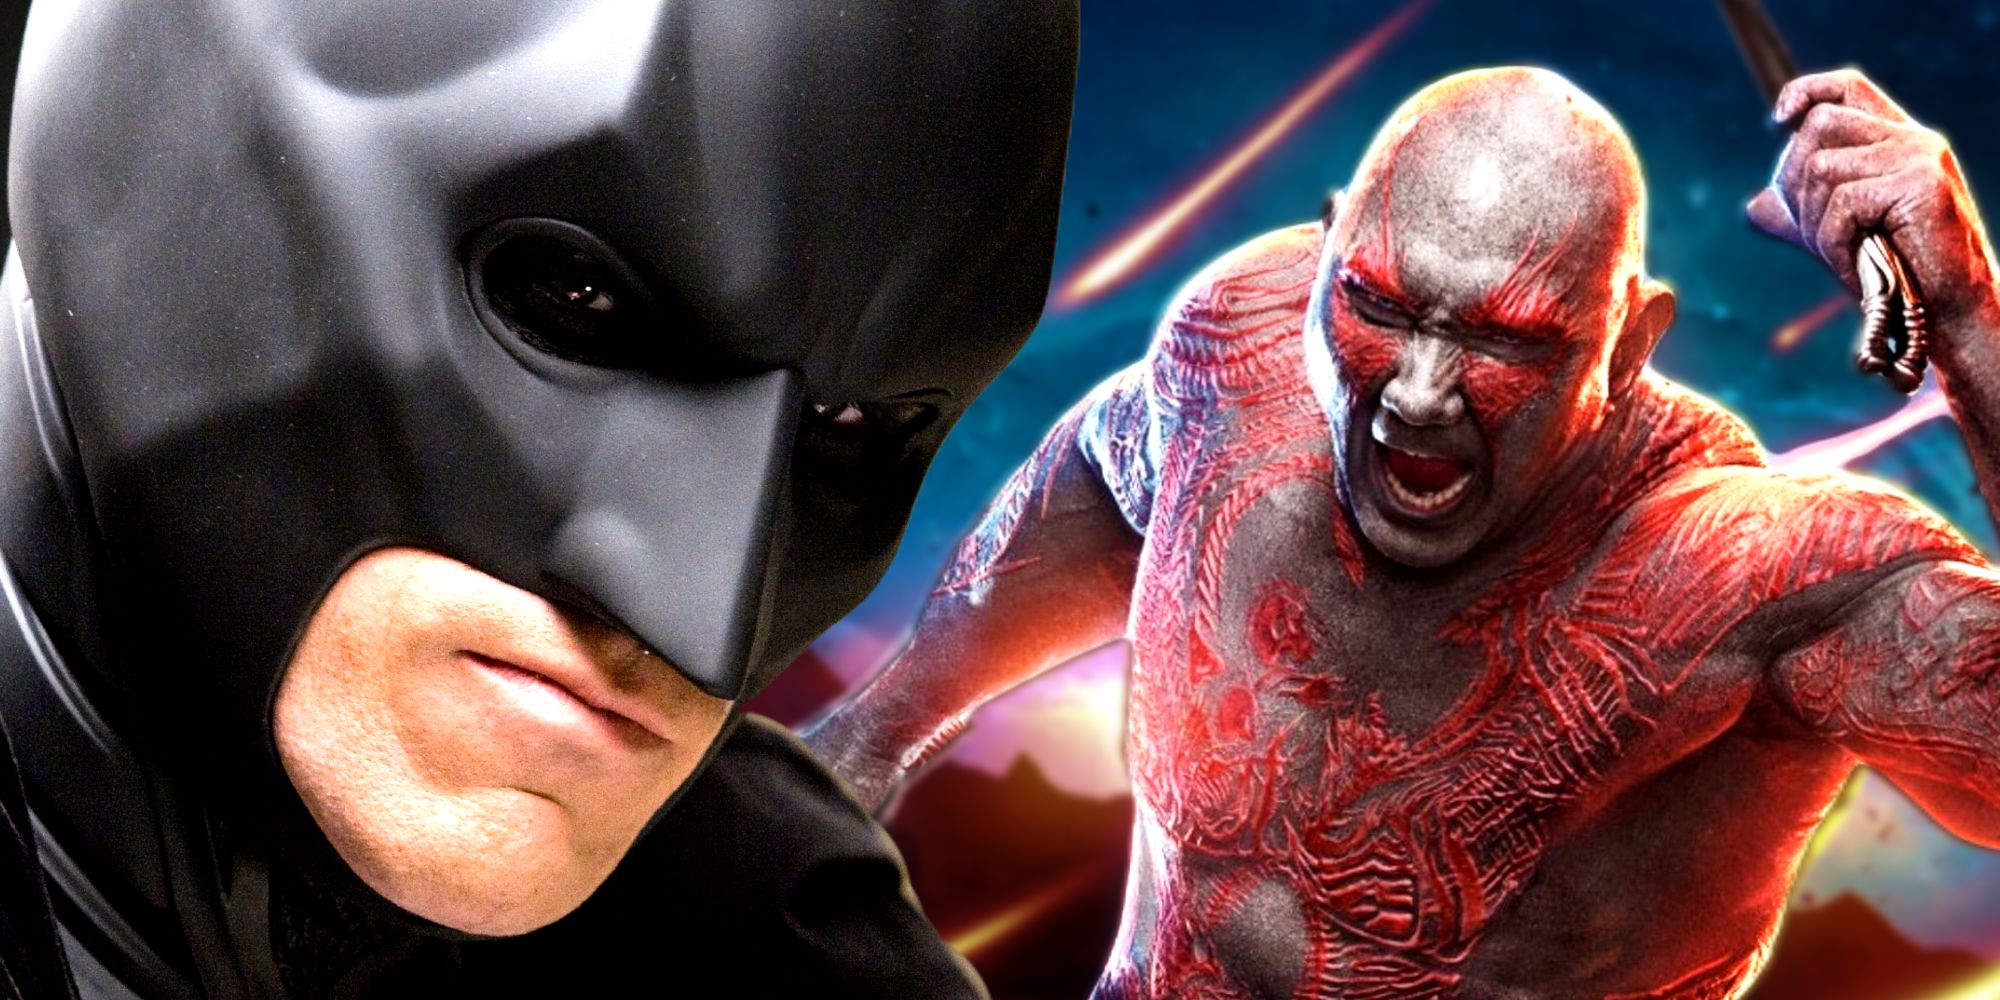 Christian Bale's Batman Cowl next to Dave Bautista's Drax charging into battle in Guardians of the Galaxy Vol 2